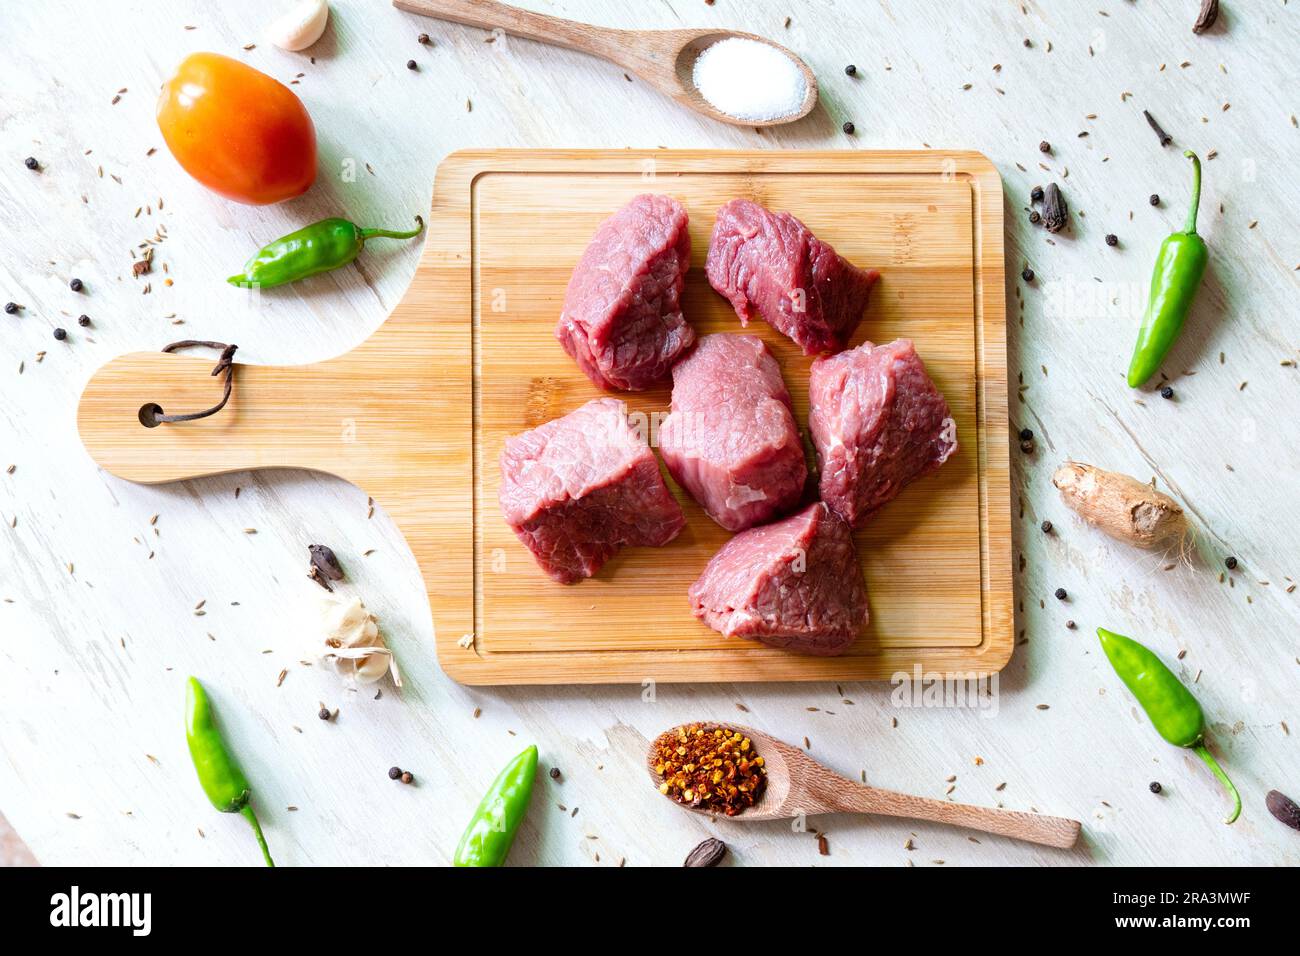 Premium Photo  Raw meat selection on wooden cutting board